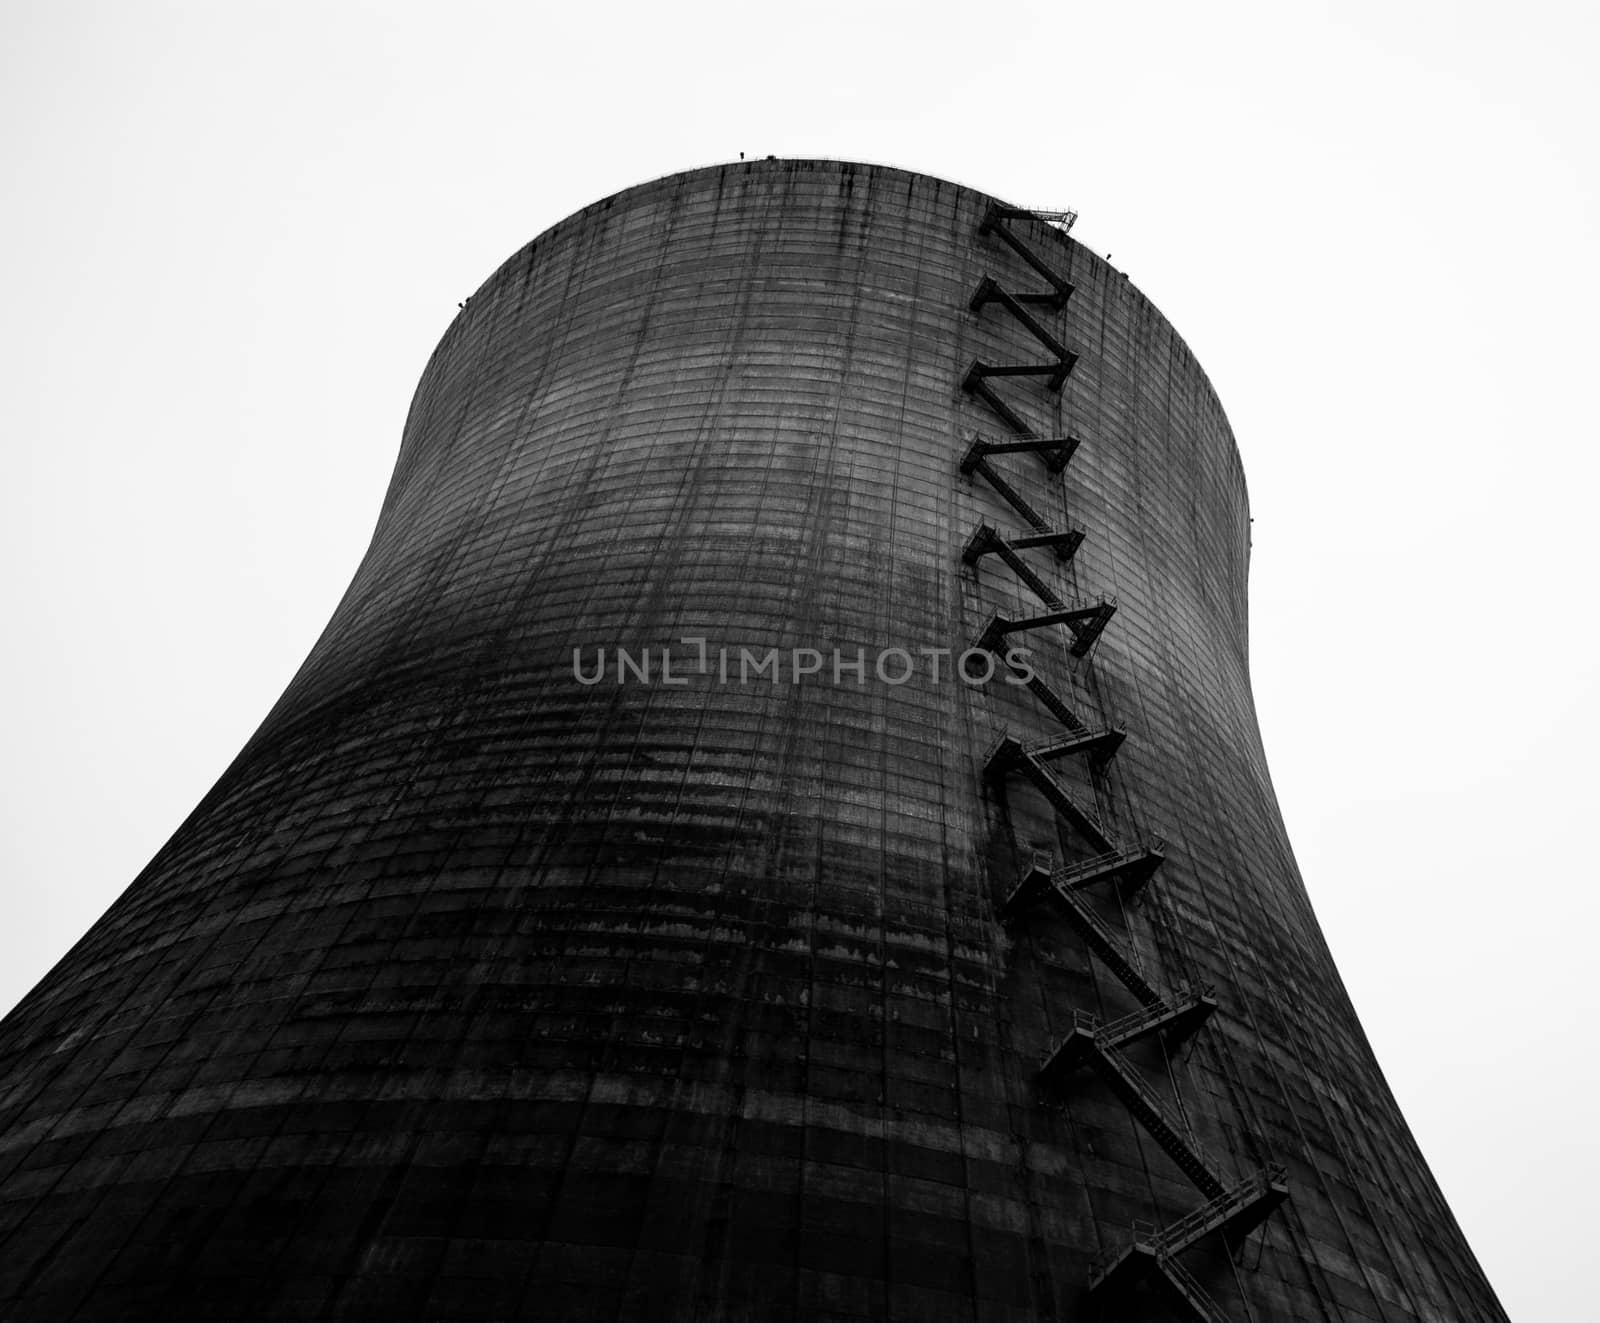 Nuclear reactor cooling tower taken in black and white